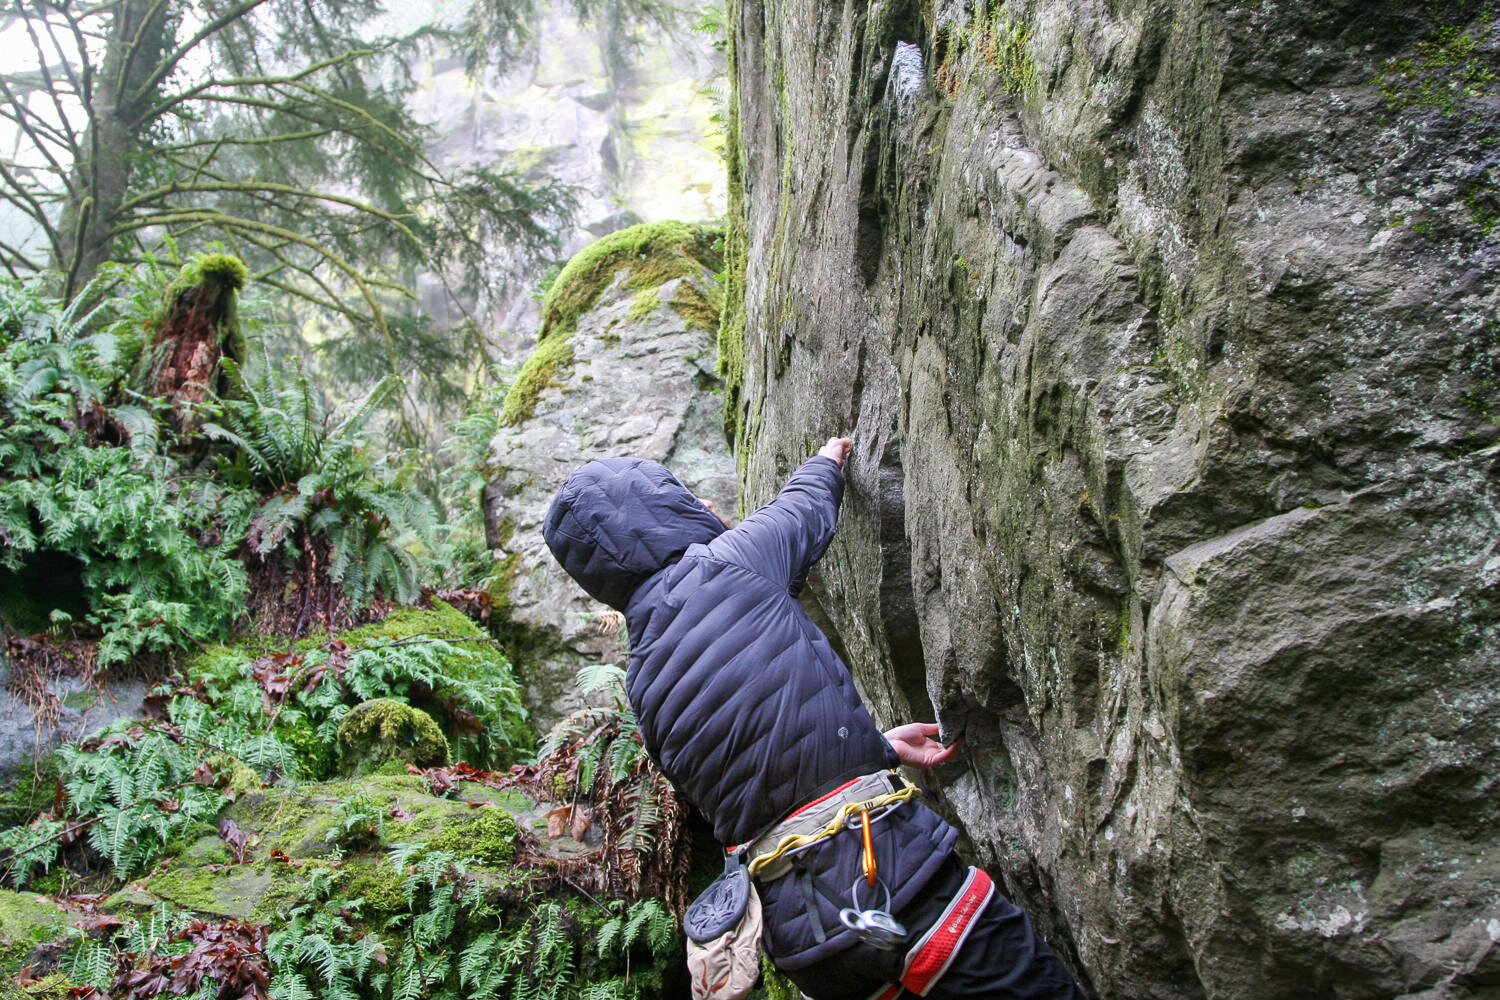 The Mountain Hardwear Super/DS Stretchdown is perfect for activities like rock climbing & bouldering